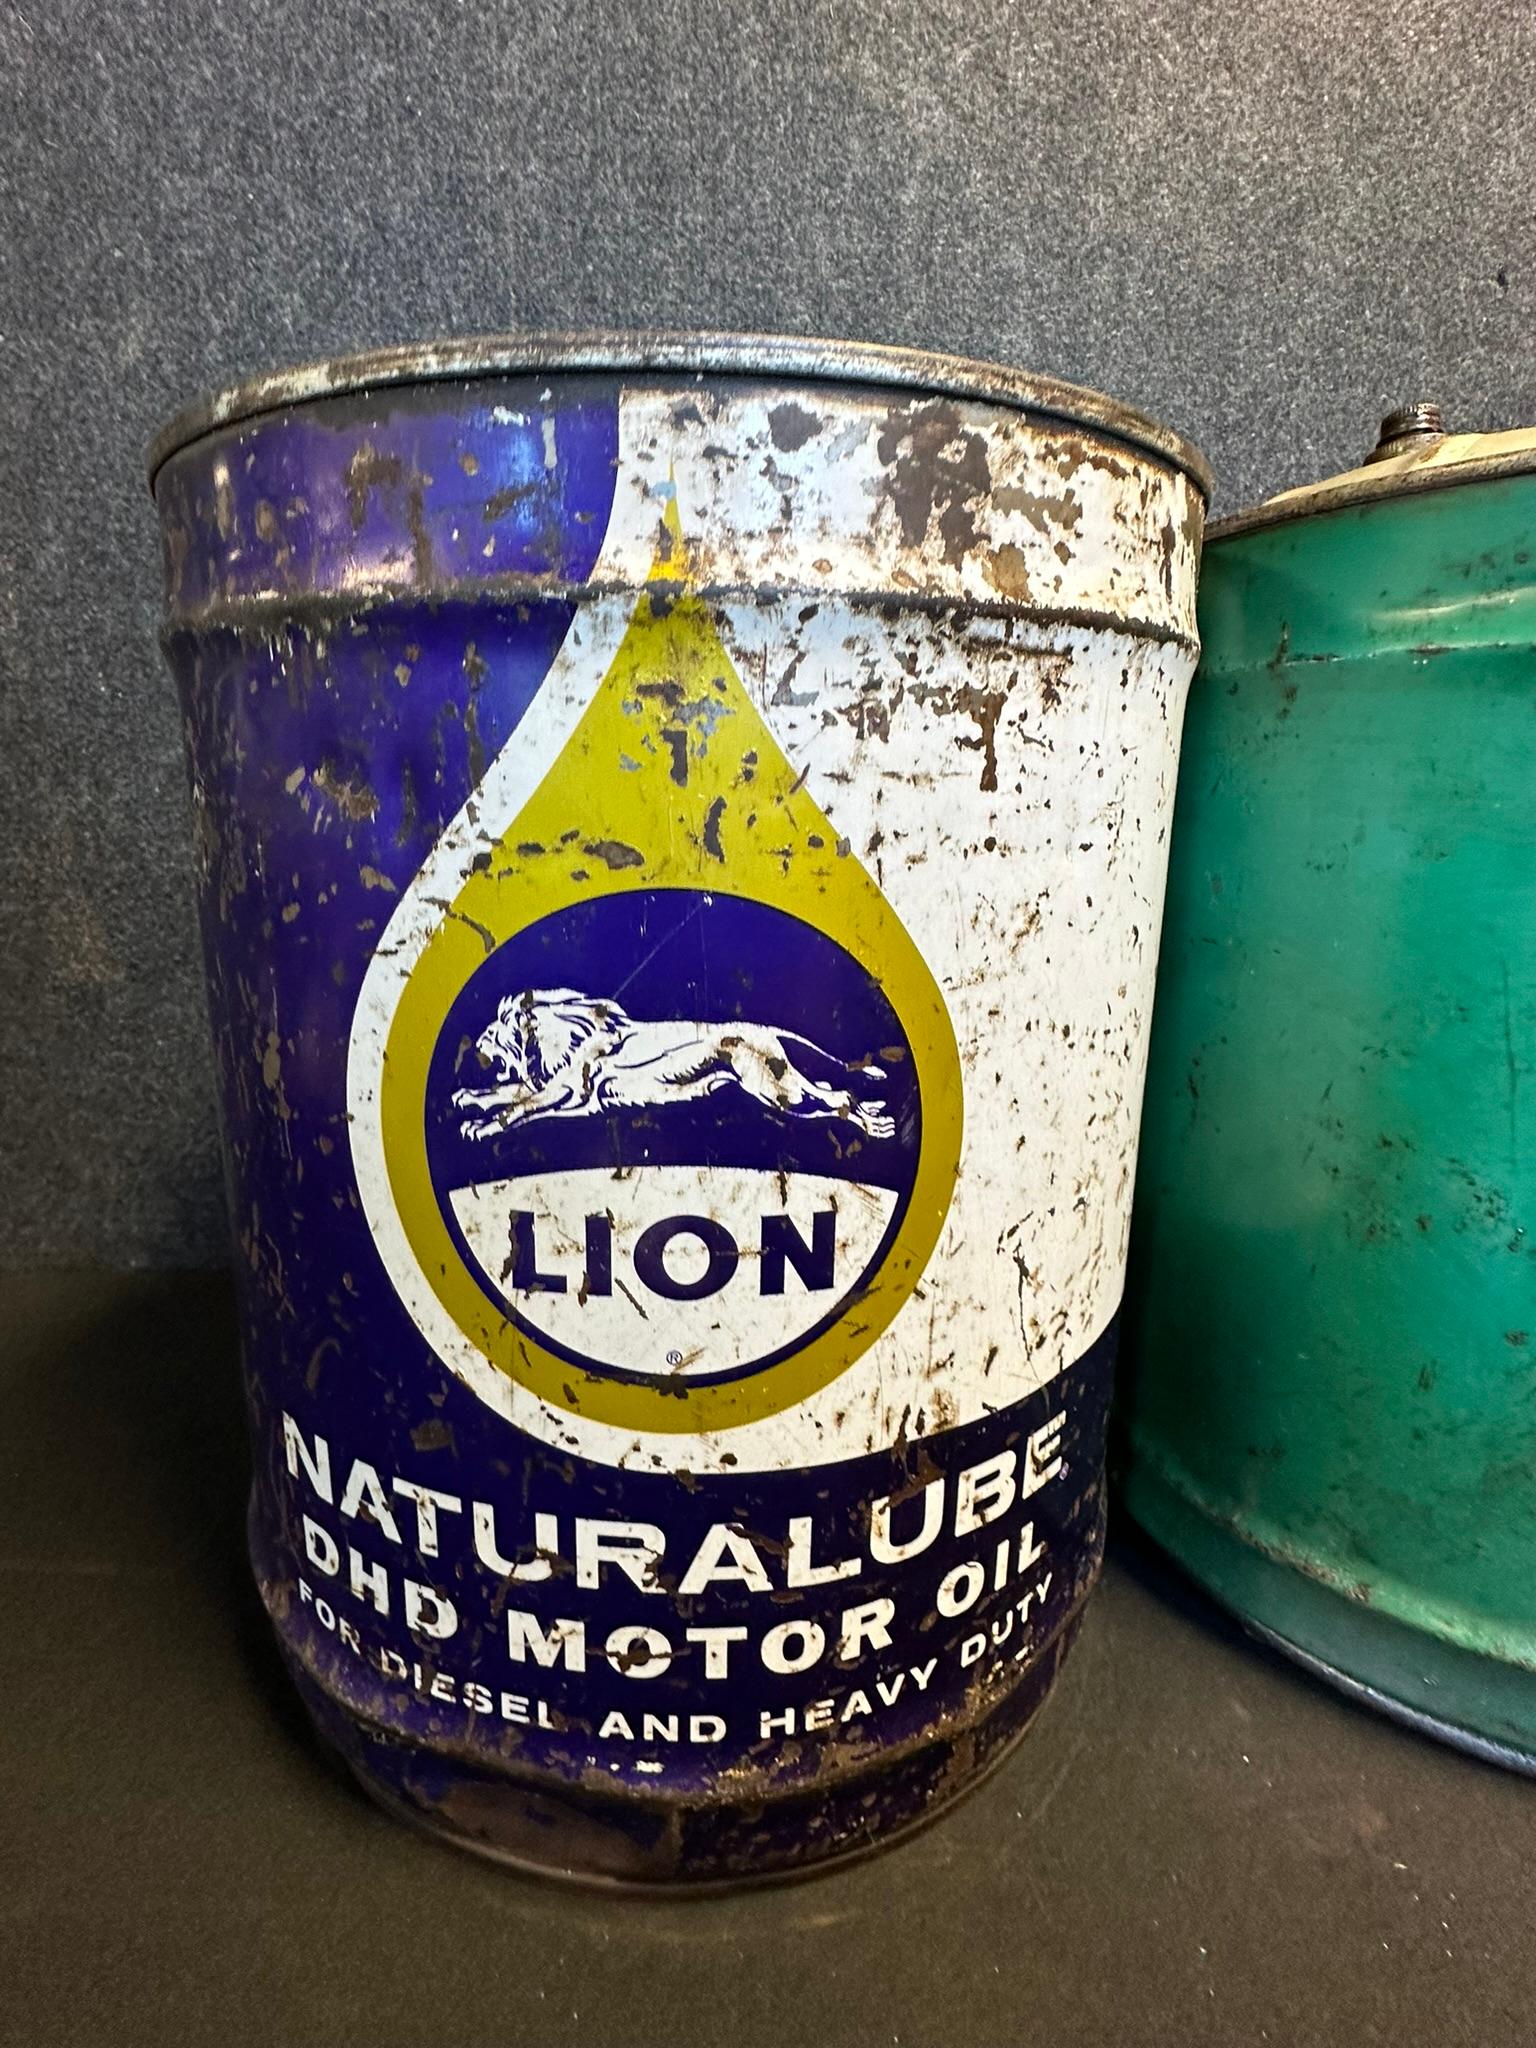 Lion Naturalube, Cities Service & Phillips 66 5 Gallon Motor Oil Can Lot